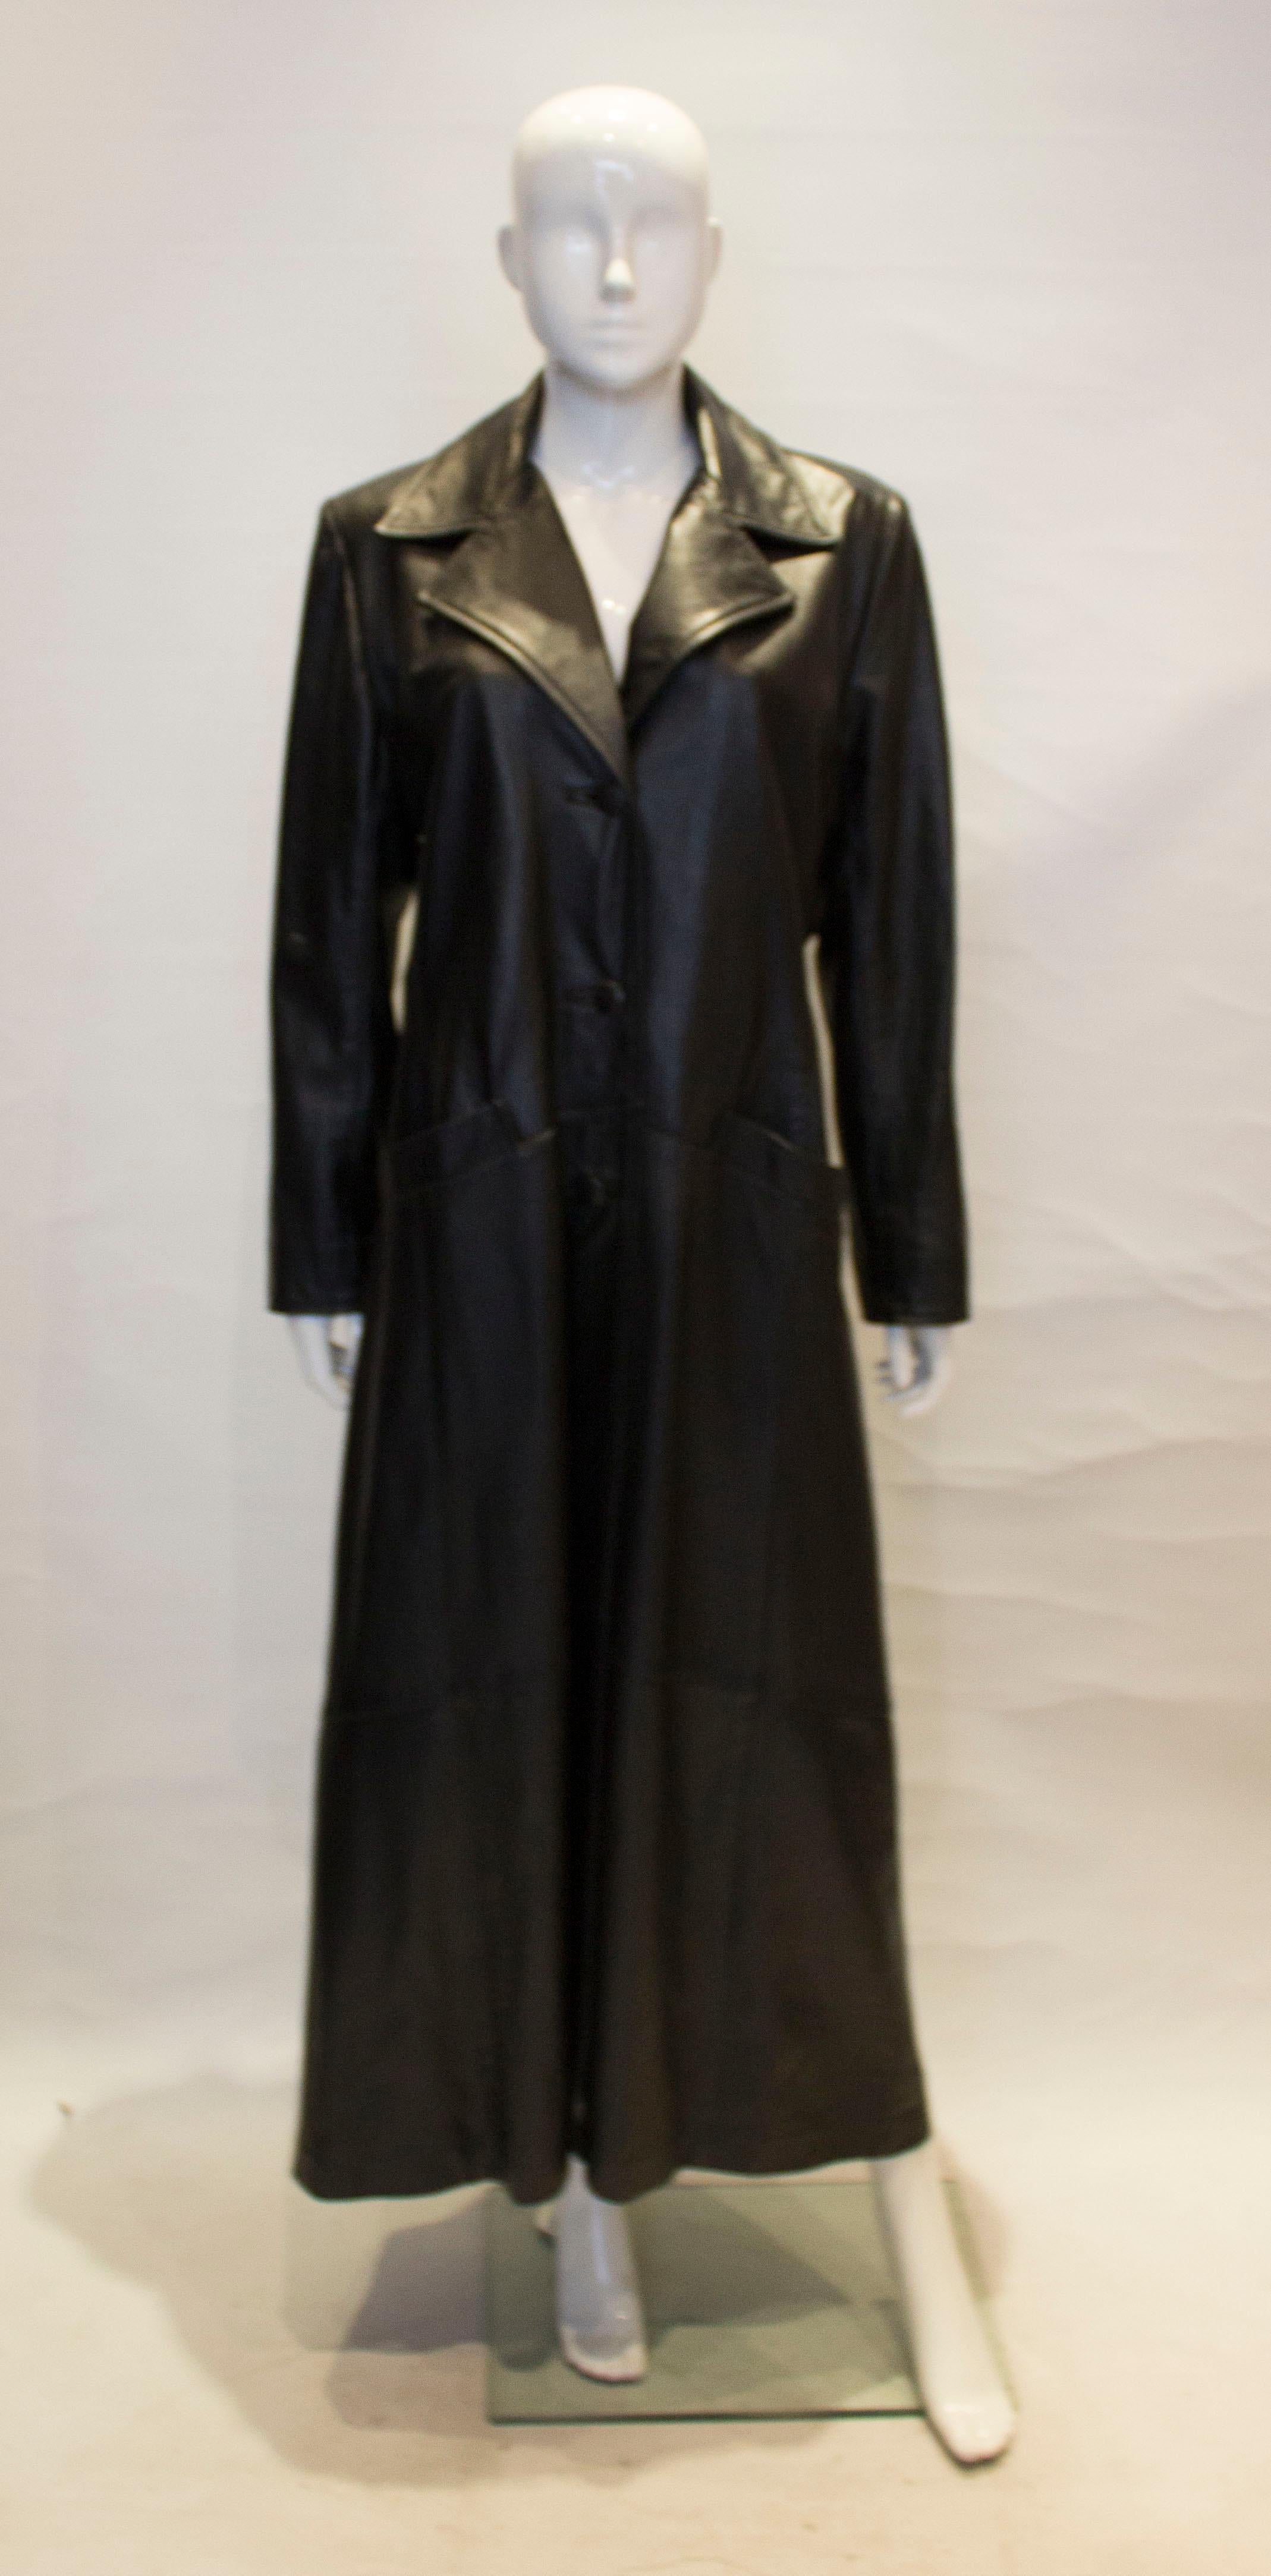 Just in time for the cooler weather , this vintage black leather coat is right on trend. 
It has a three button cuff detail and three button front opening and three button opening at the back . The coat is fully lined.